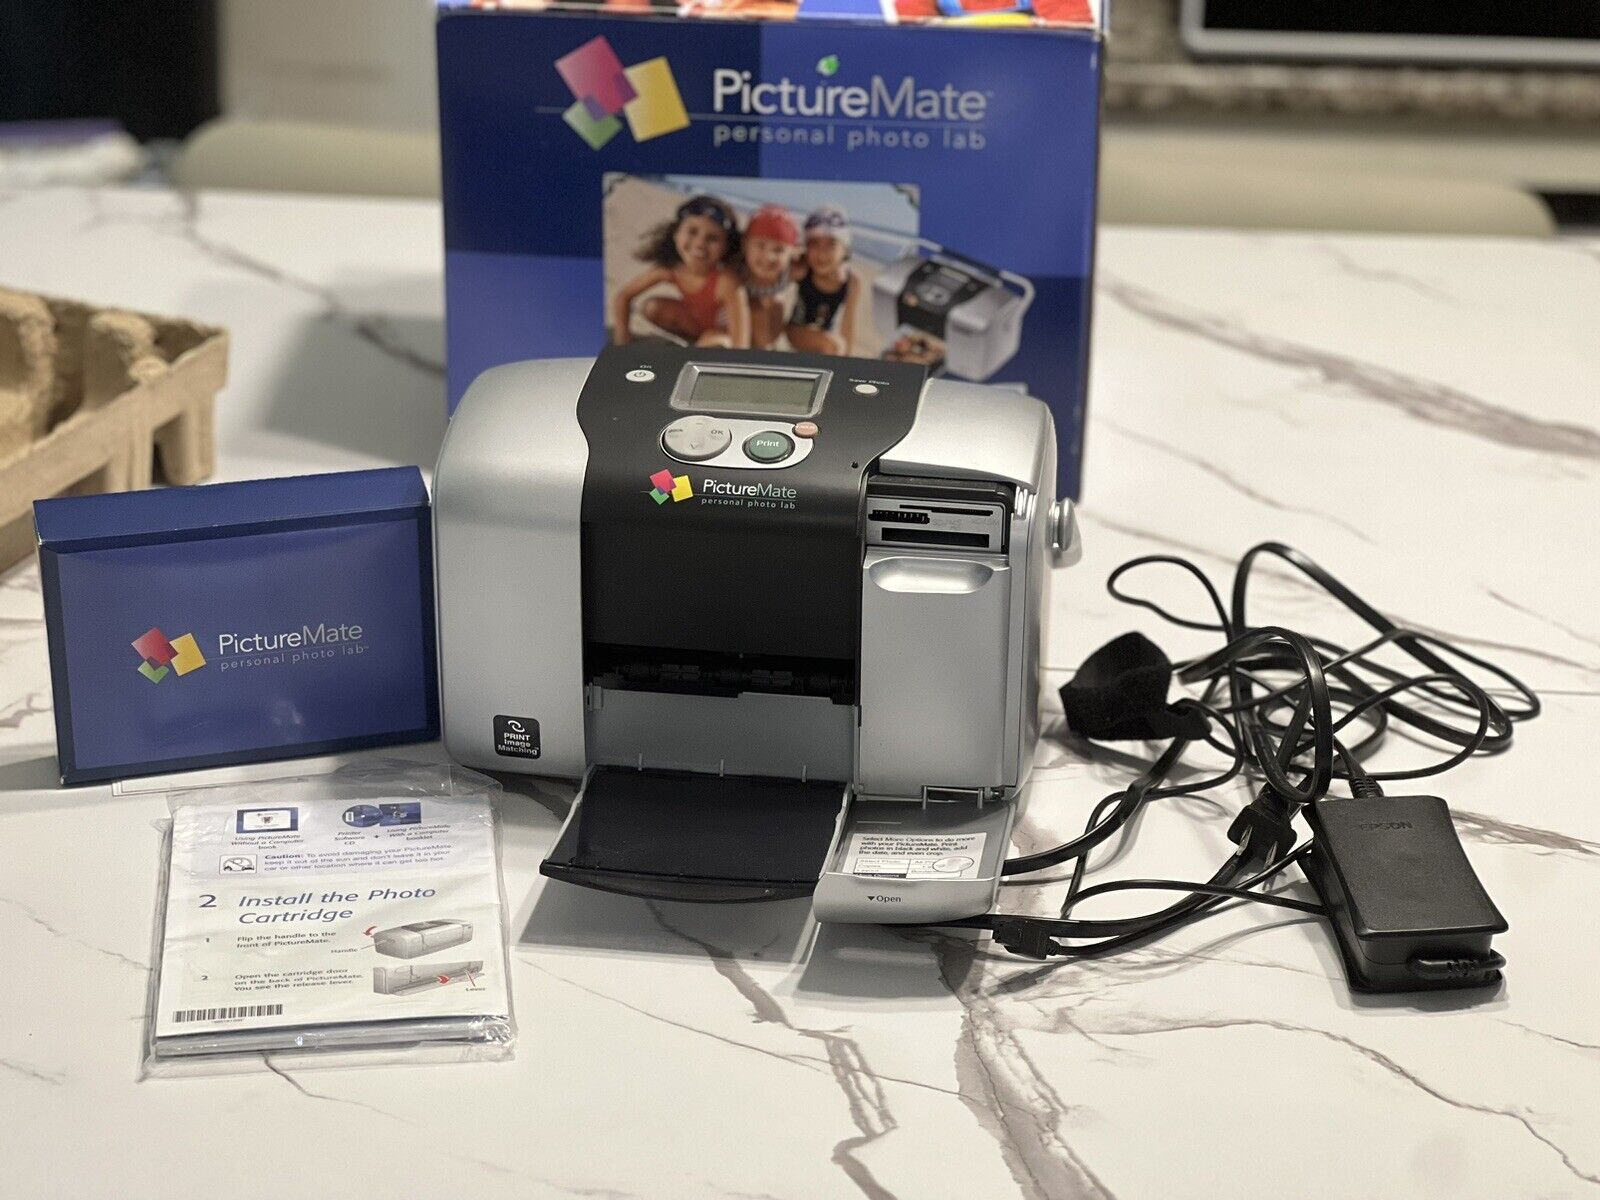 Epson PictureMate Express Edition Personal Photo Lab Printer Model NEW